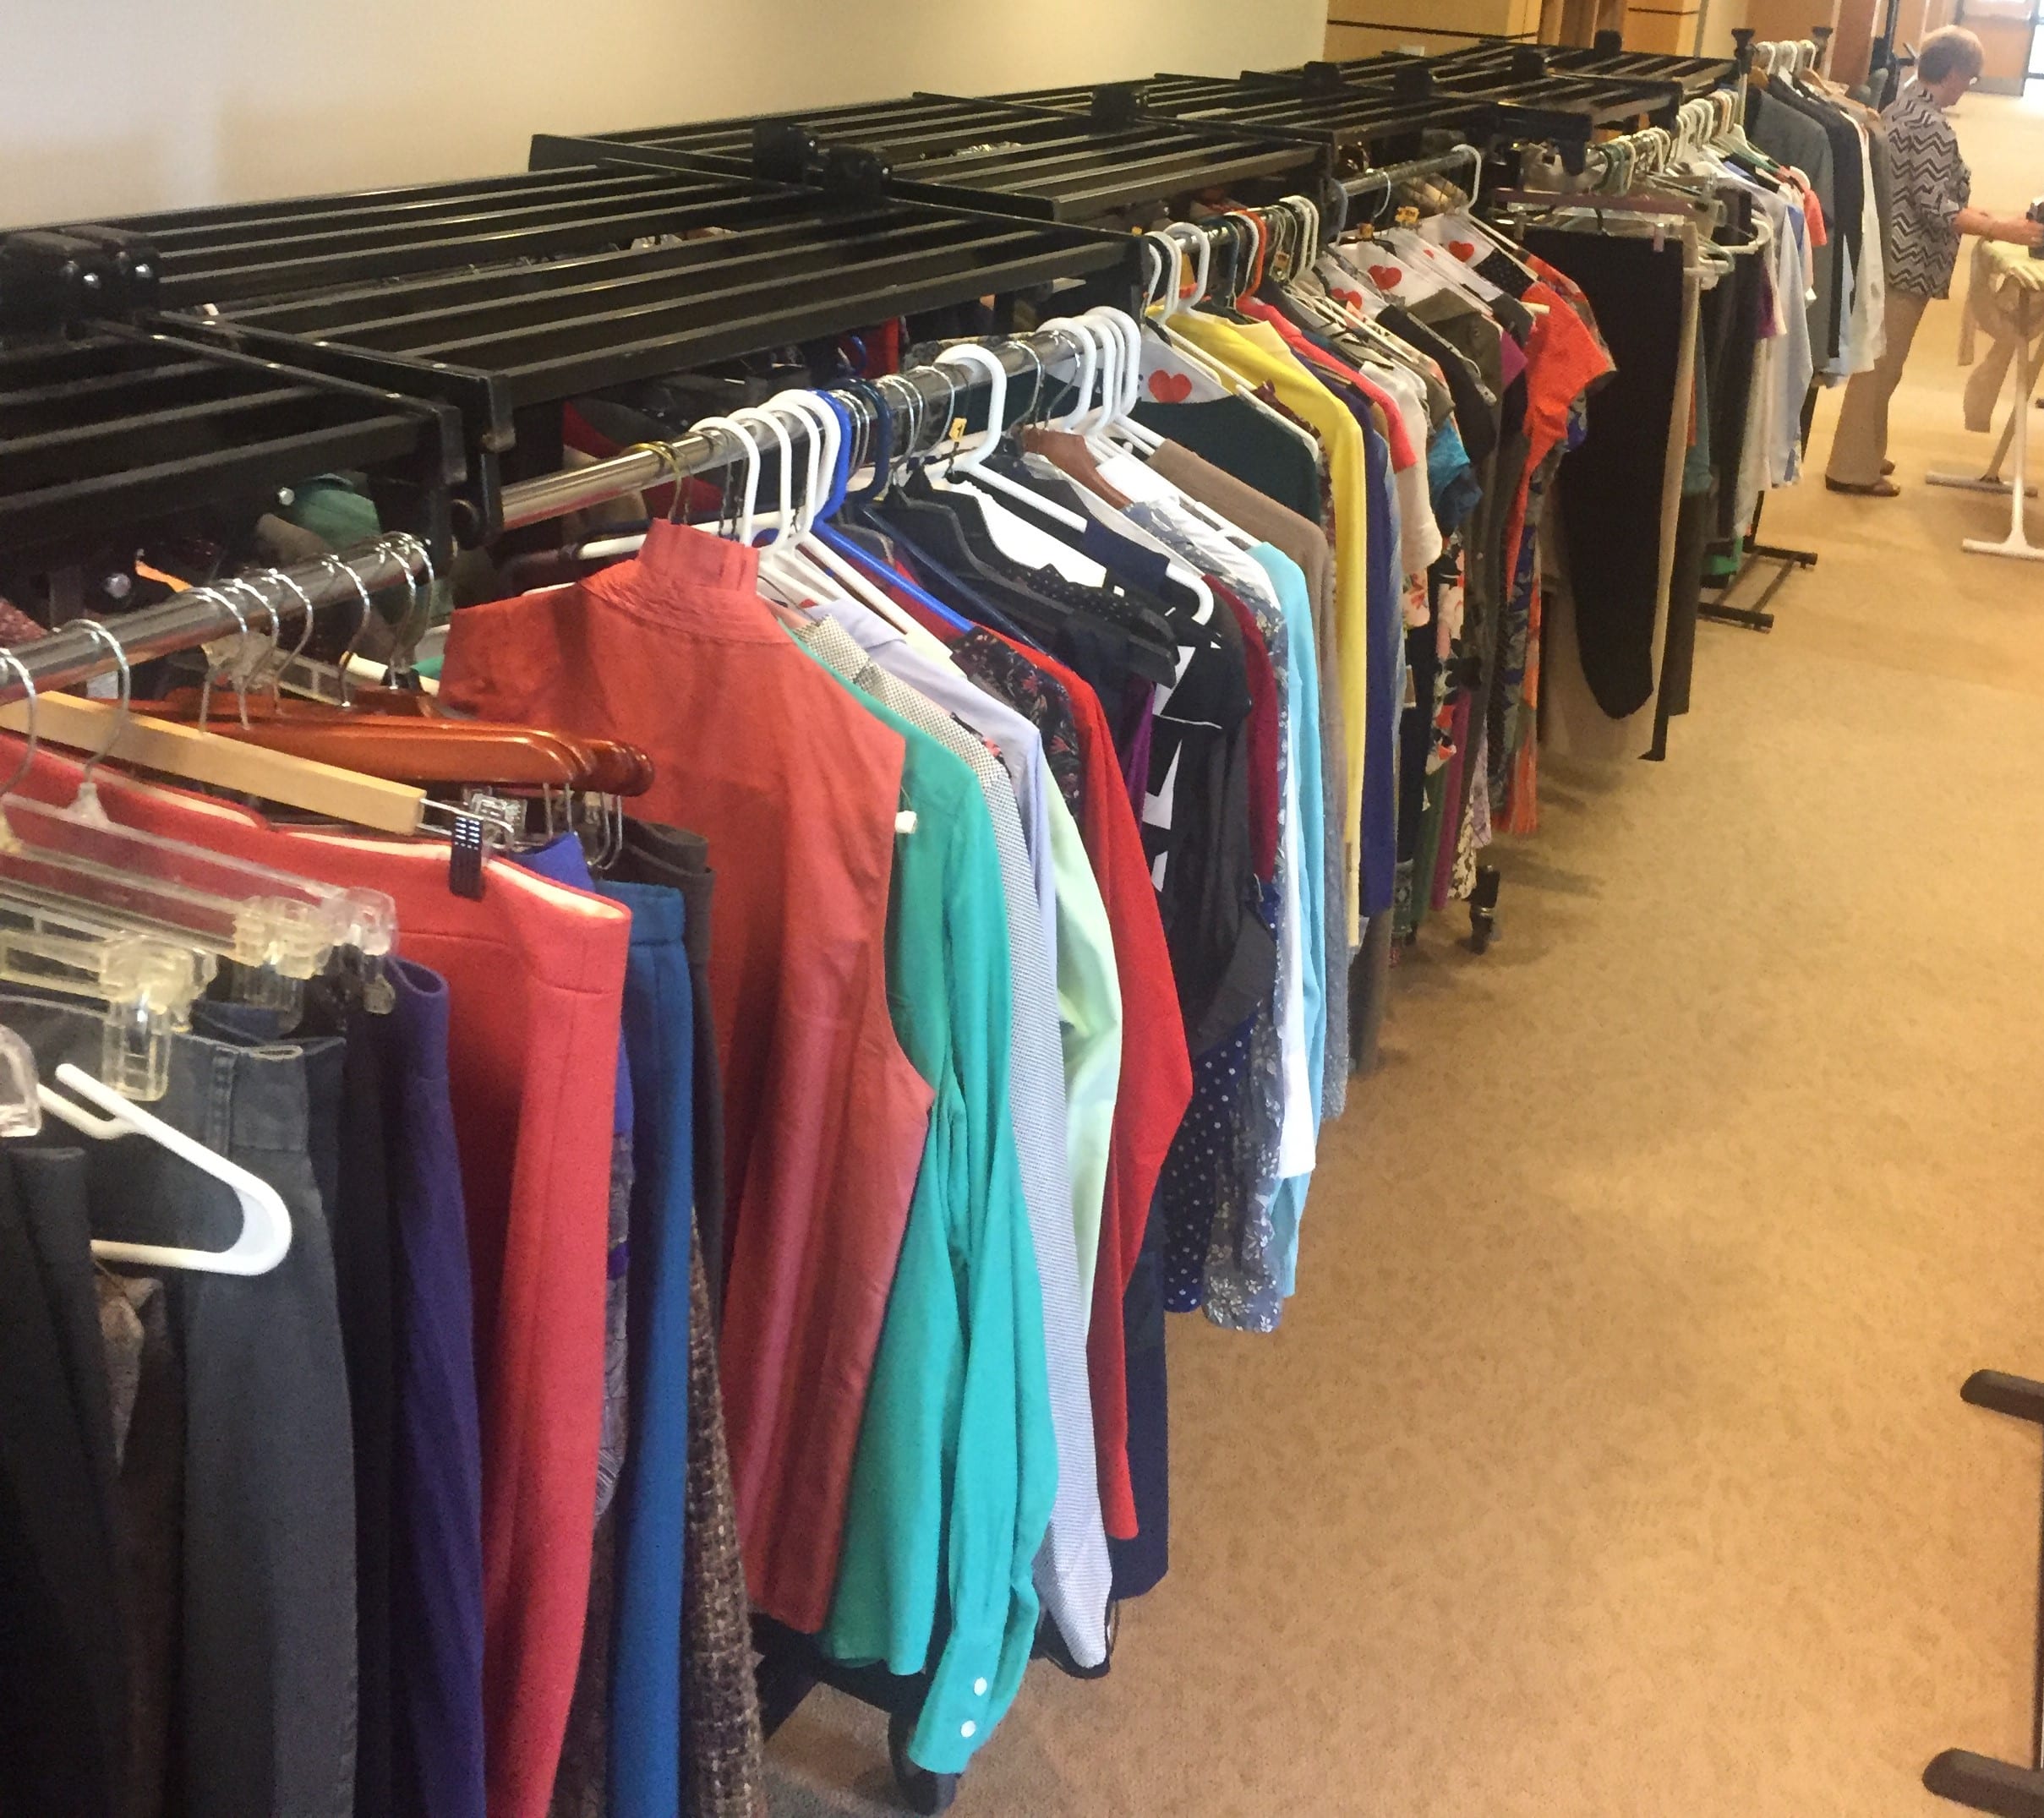 Just a sampling of the 500 articles of clothing that were donated from the Haverford community